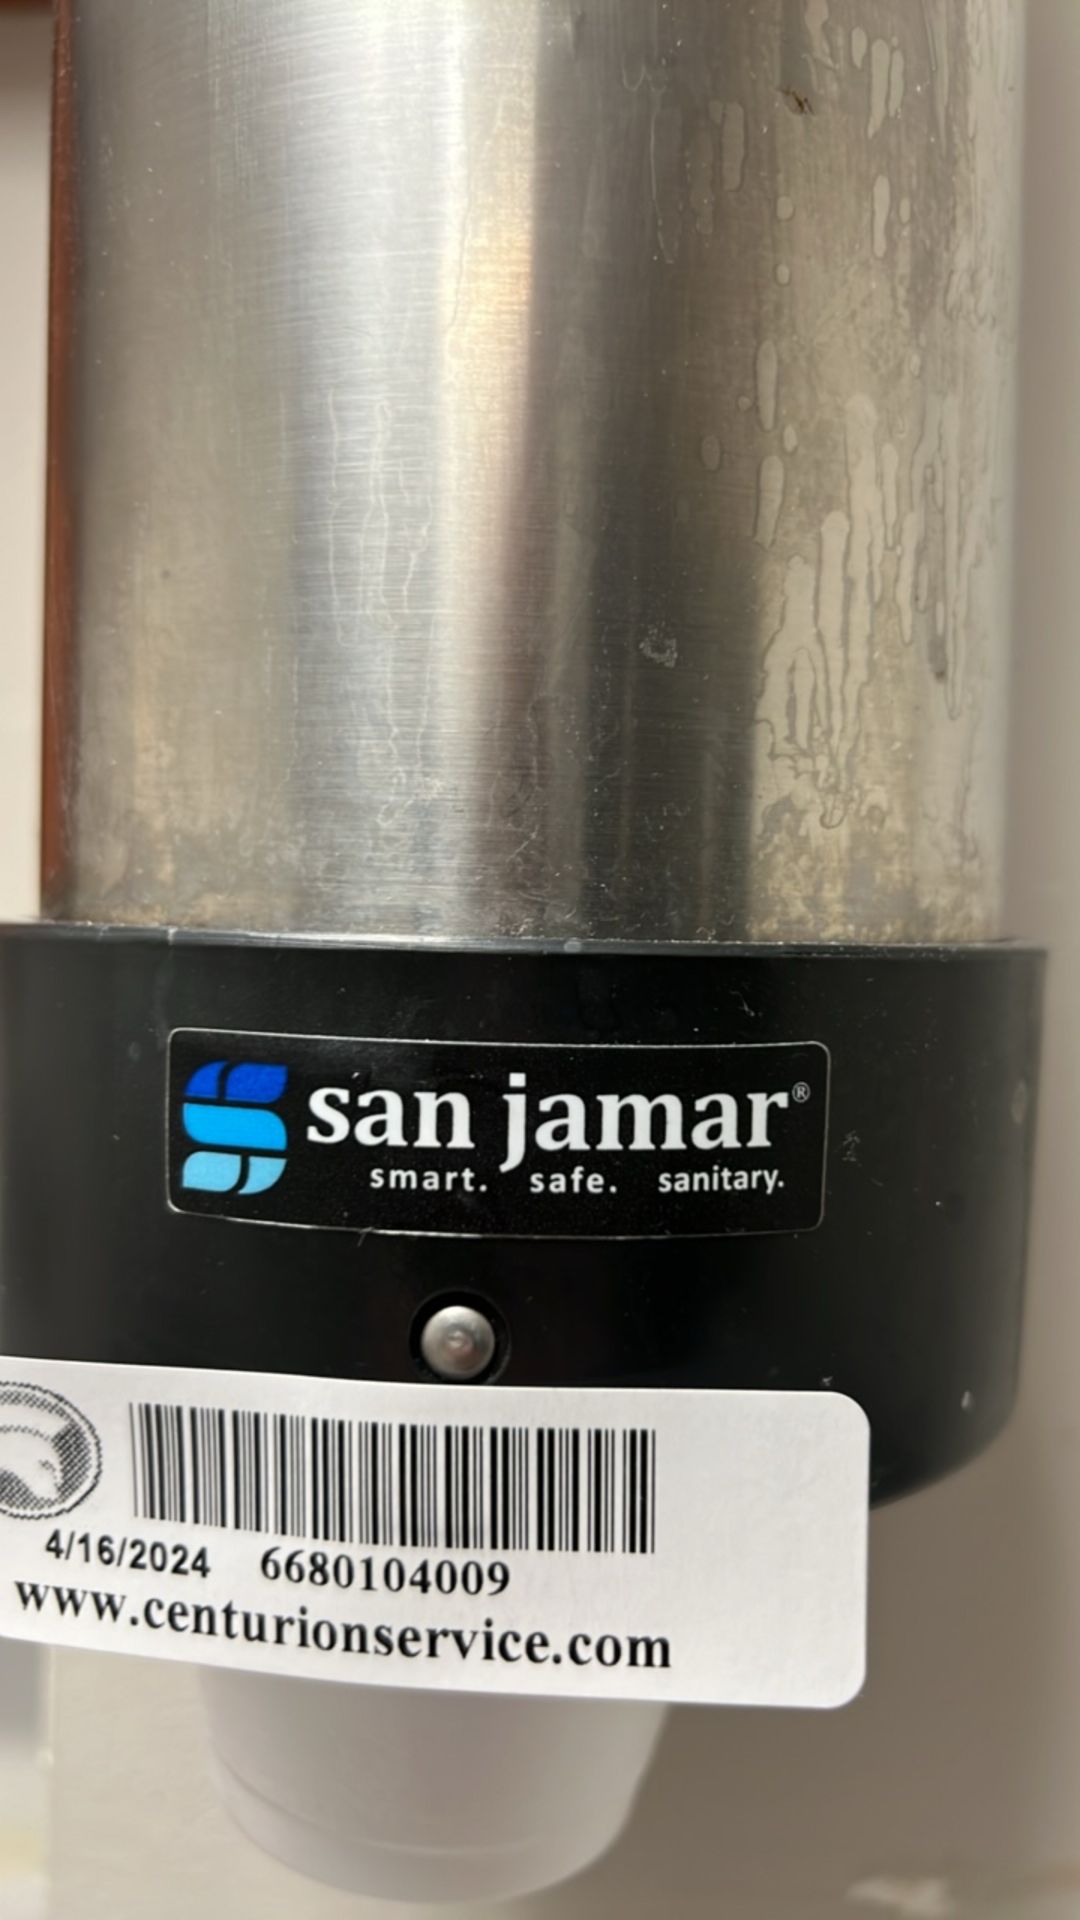 SAN JAMAR STAINLESS STEELWALL MOUNT CUP DISPENSER SYSTEM - Image 2 of 2